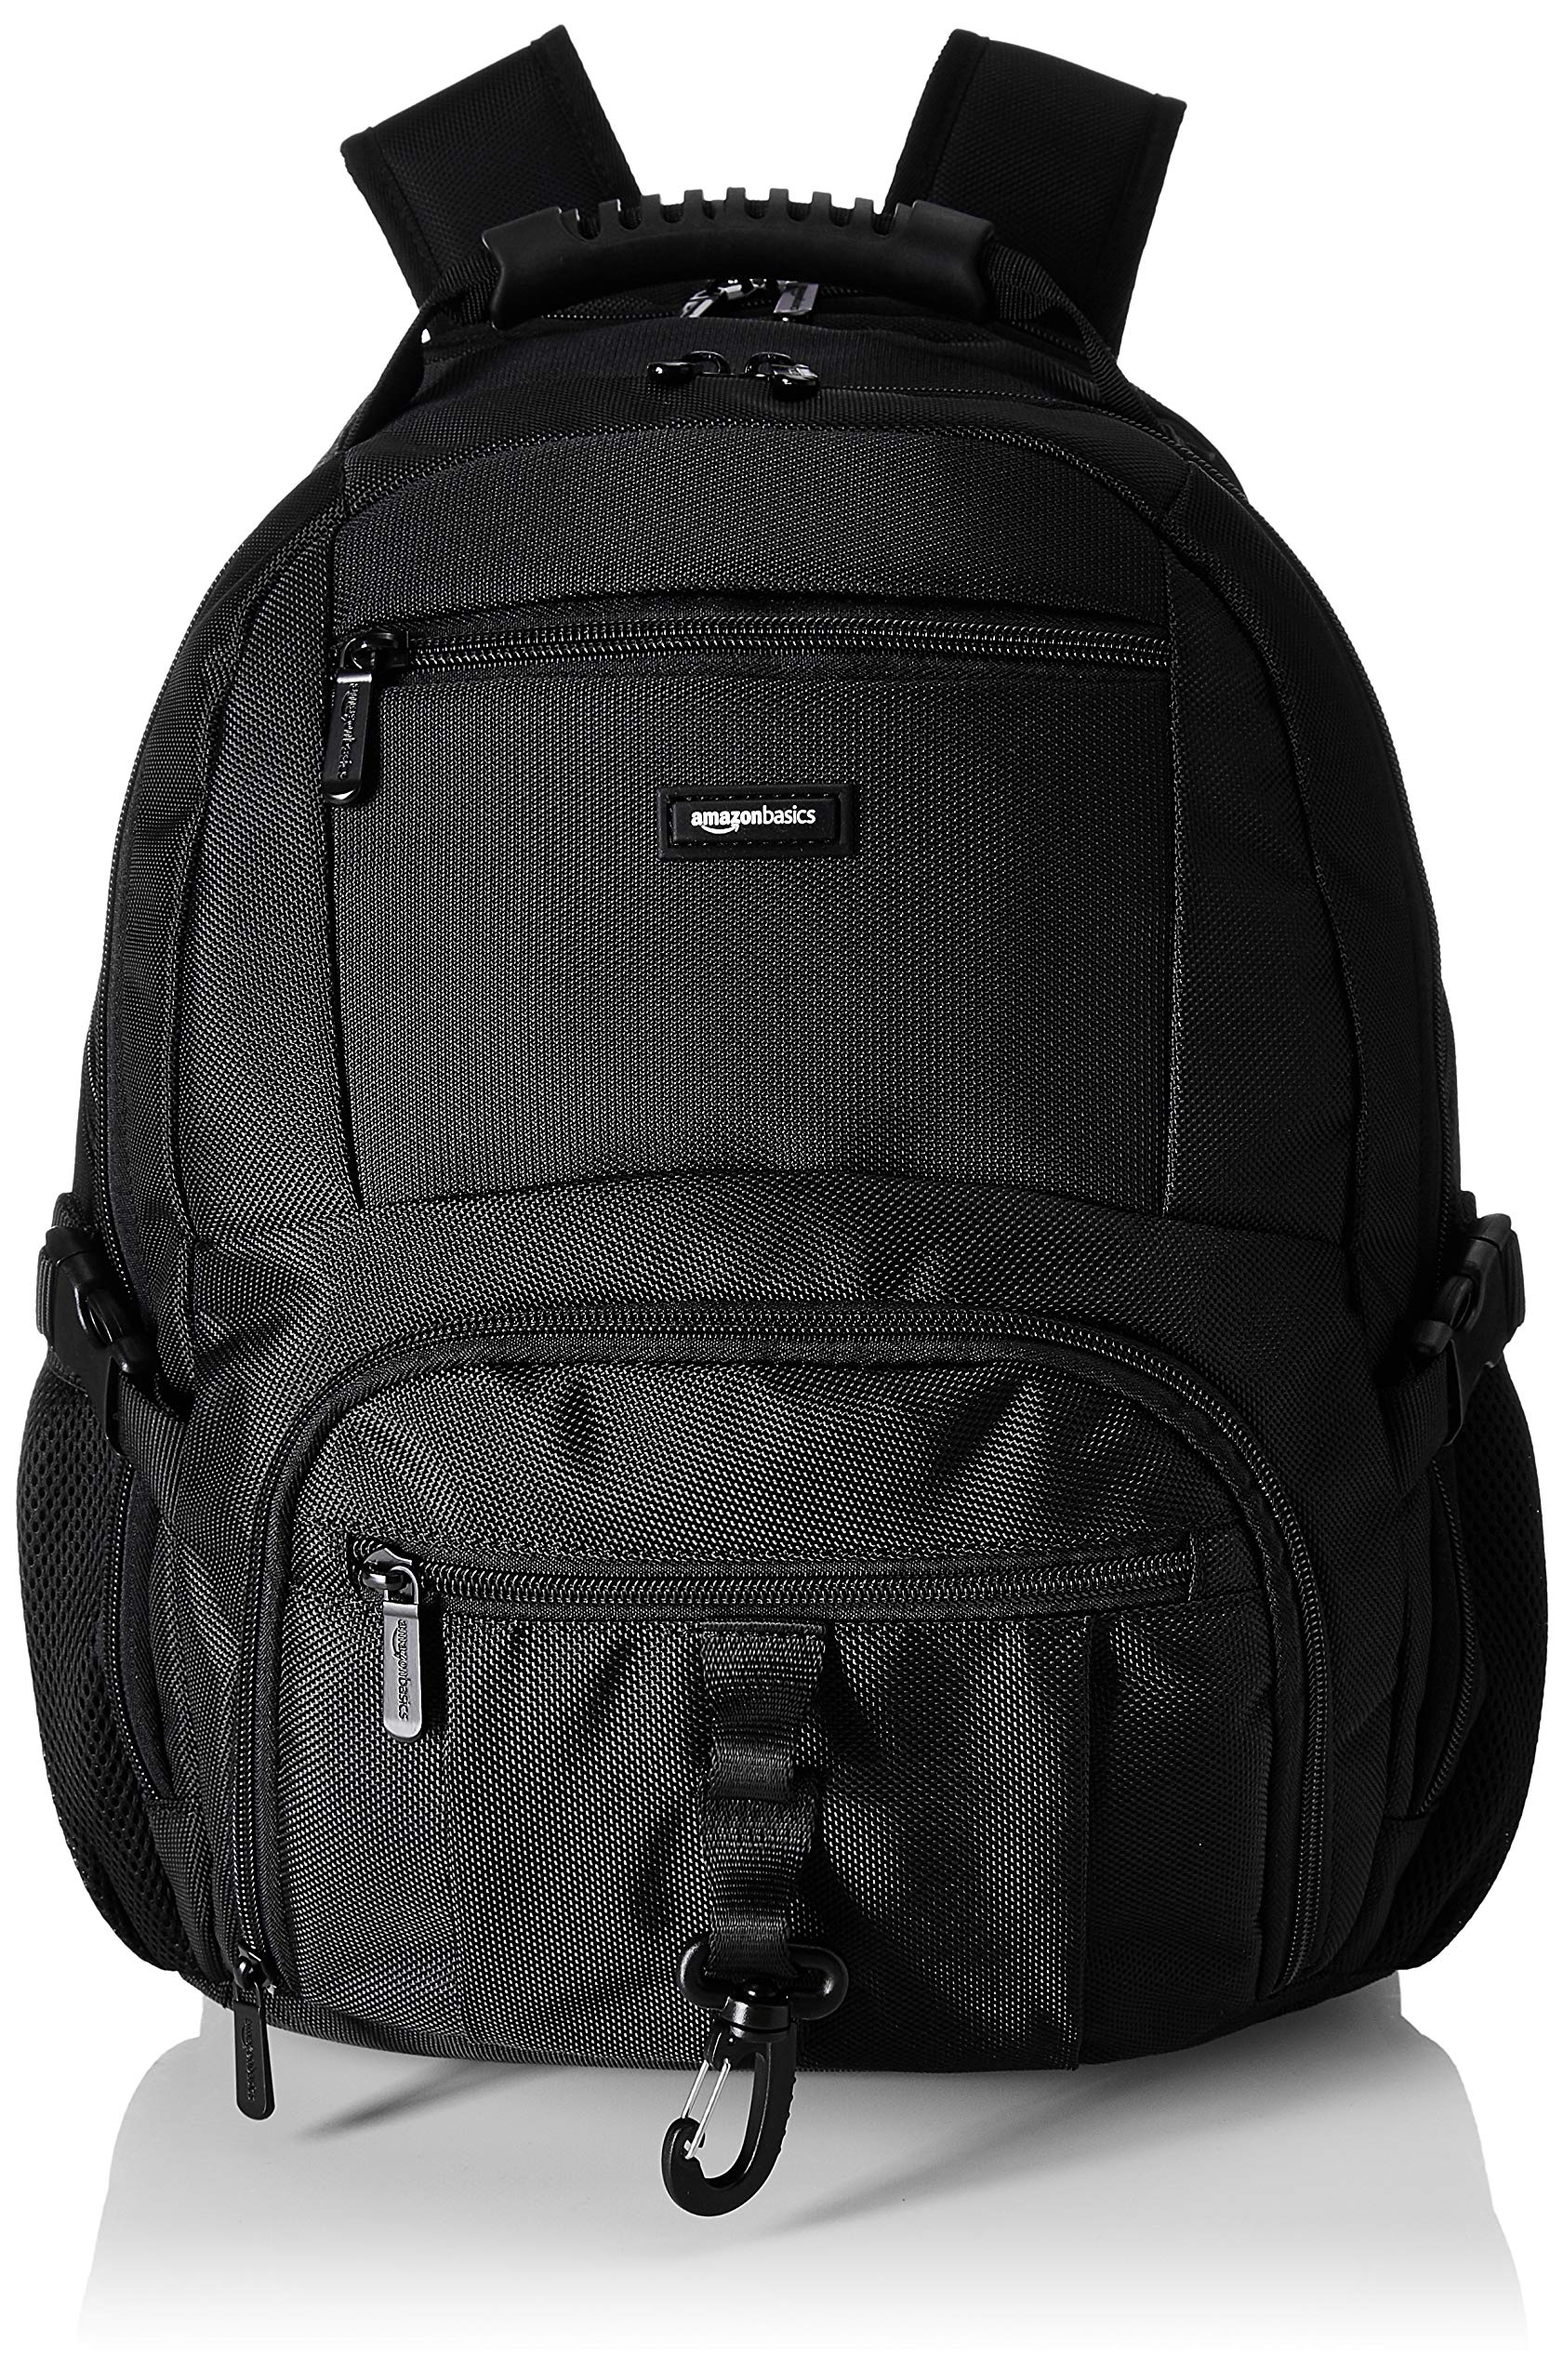 Amazon Basics Multi-Compartment Backpack with Top Handle and Padded Shoulder Straps, Fits up to 15-Inch Laptop - Black